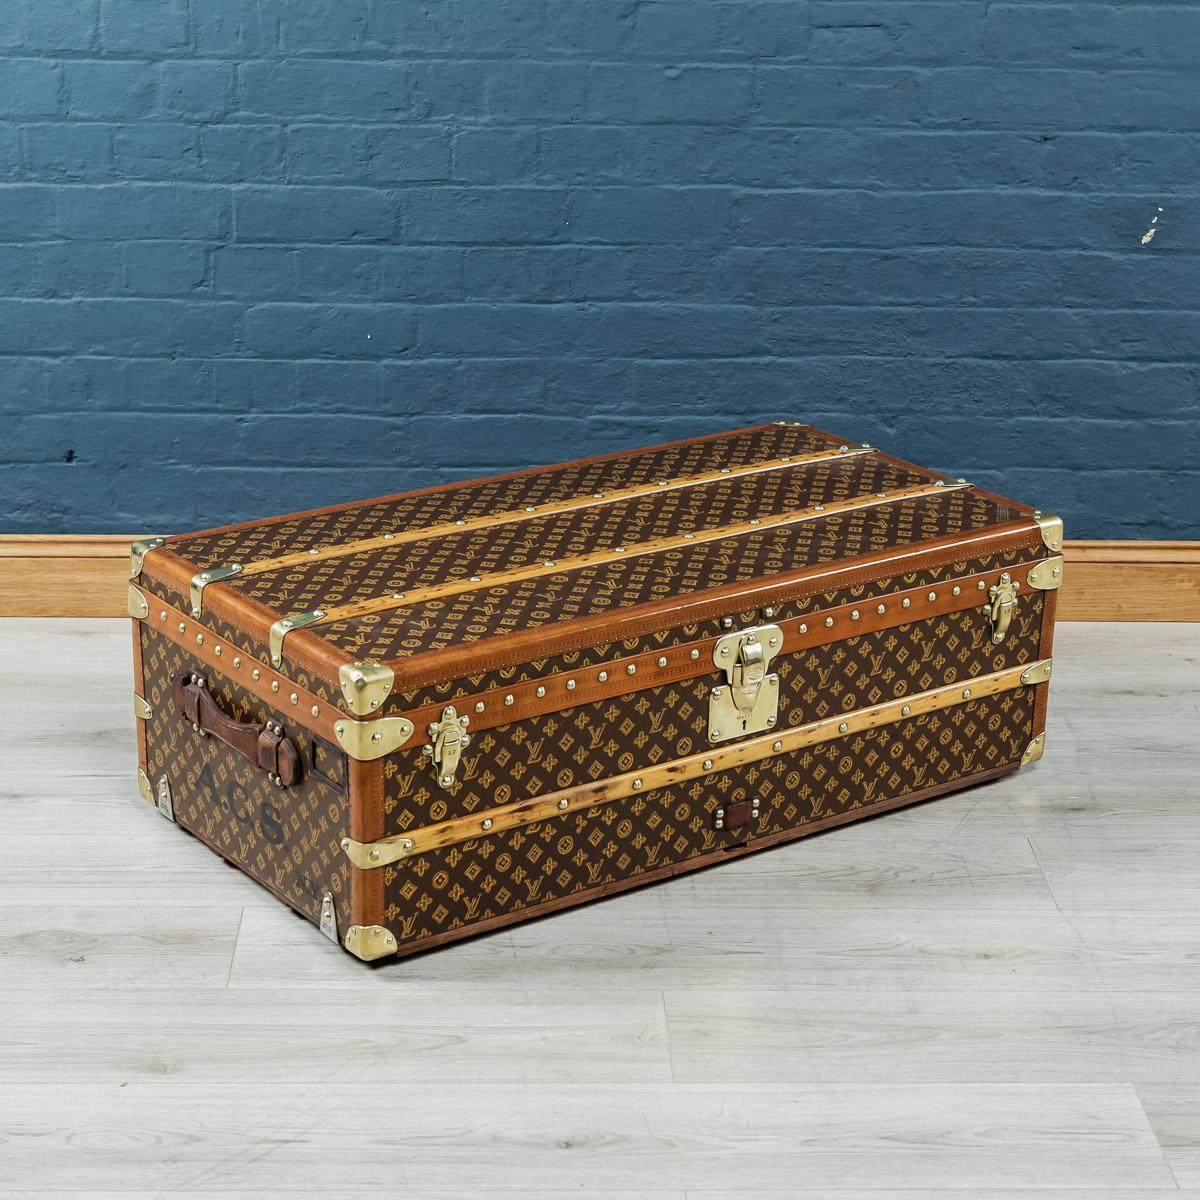 Description

Beautiful early 20th century Louis Vuitton trunk covered in the world famous LV monogrammed canvas, with its lozine borders and brass fitting this trunk would have been the top of the line even at the time of purchase some 100 years